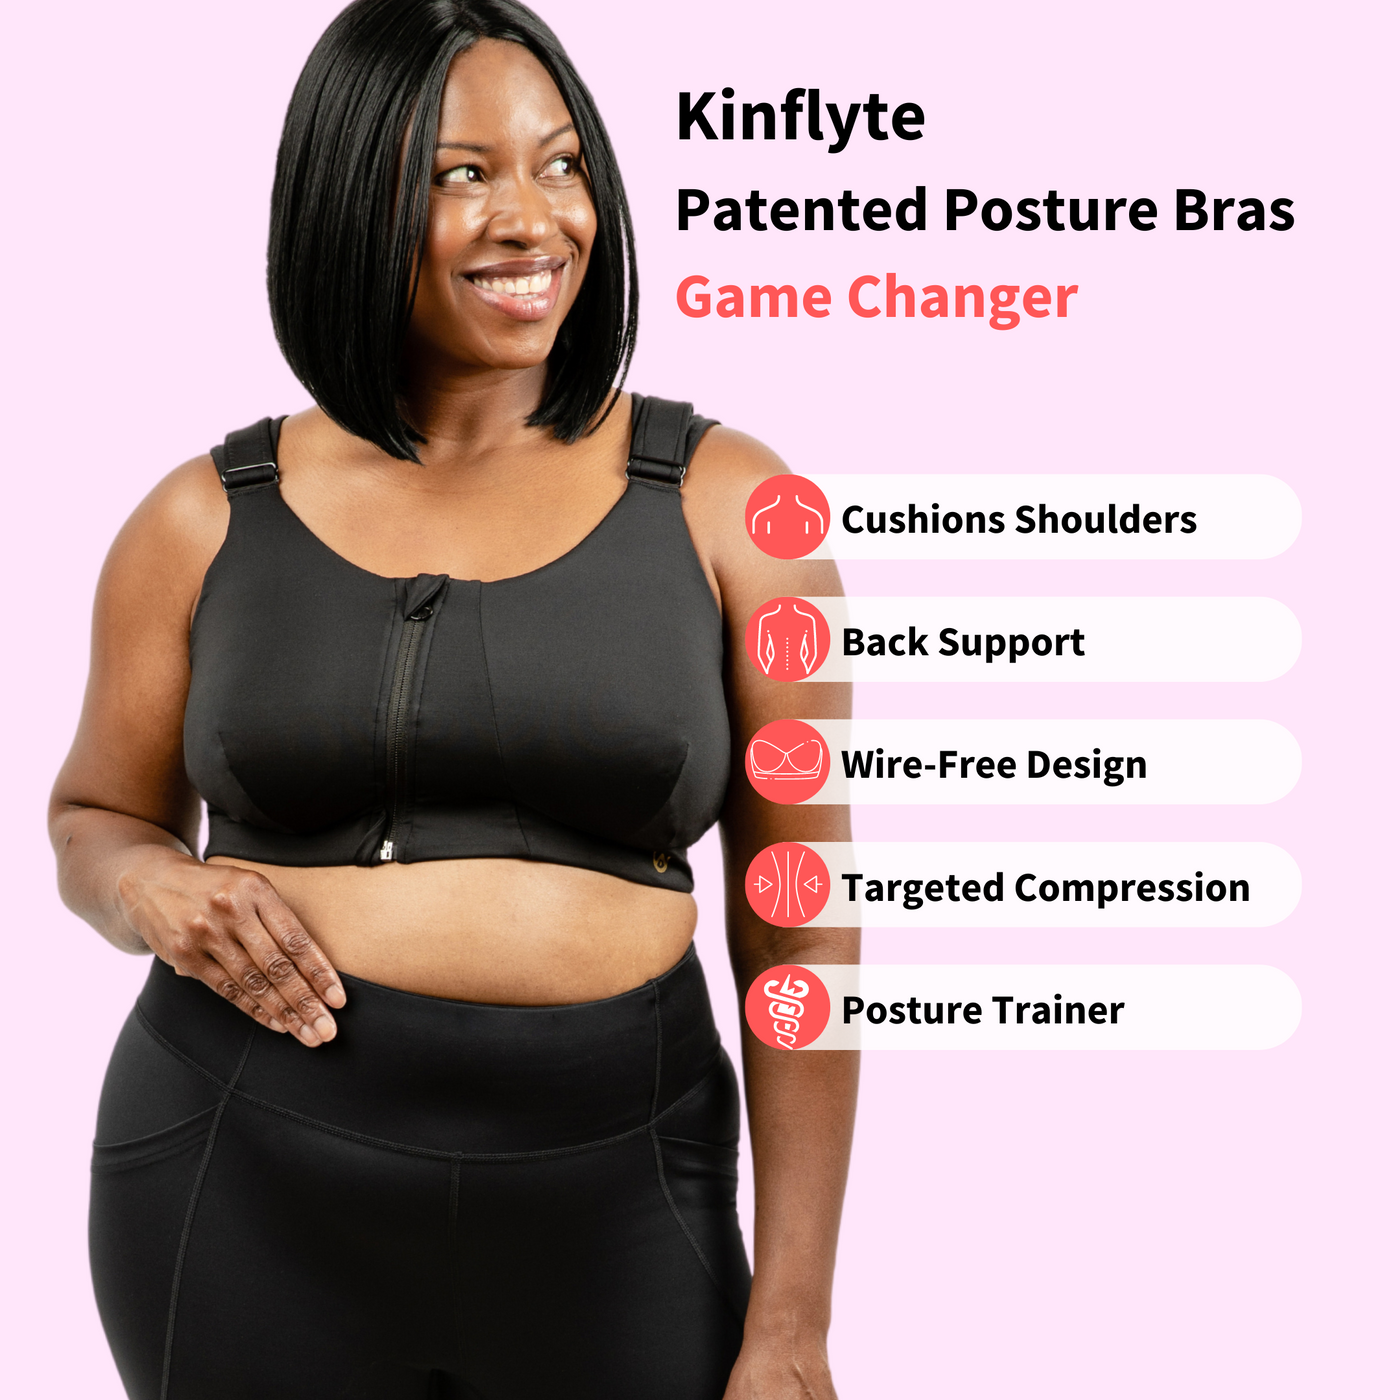 Posture Sports Bra - Patented Posture Bra that cushions shoulders, back support, wireless, targeted compression